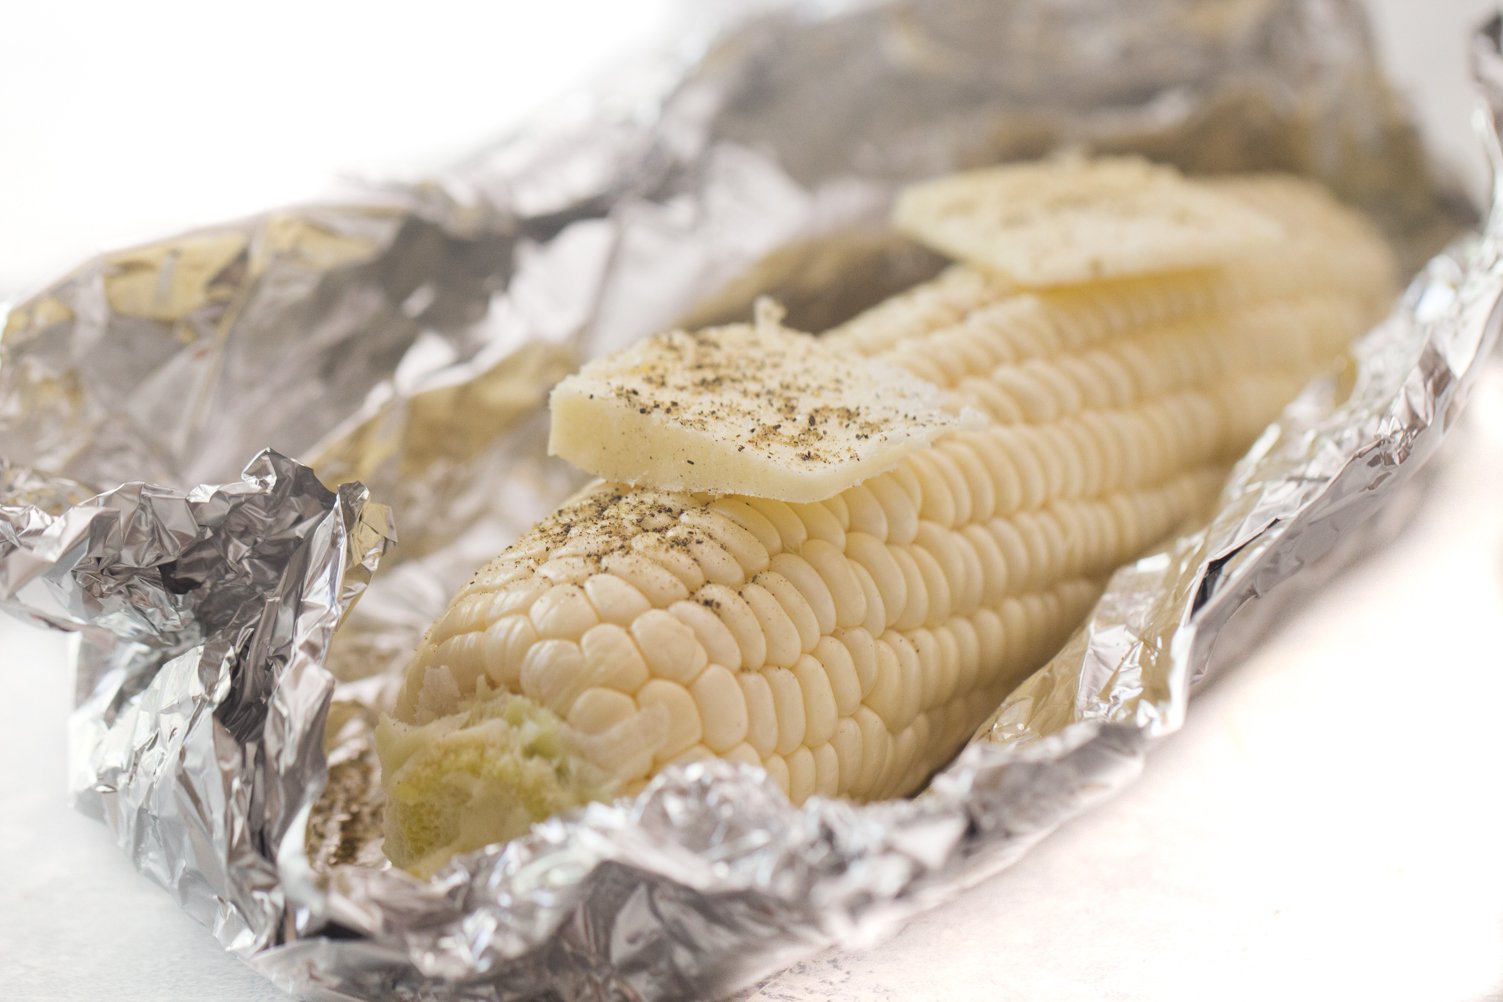 Corn on the cob wrapped in foil with butter and seasonings on it